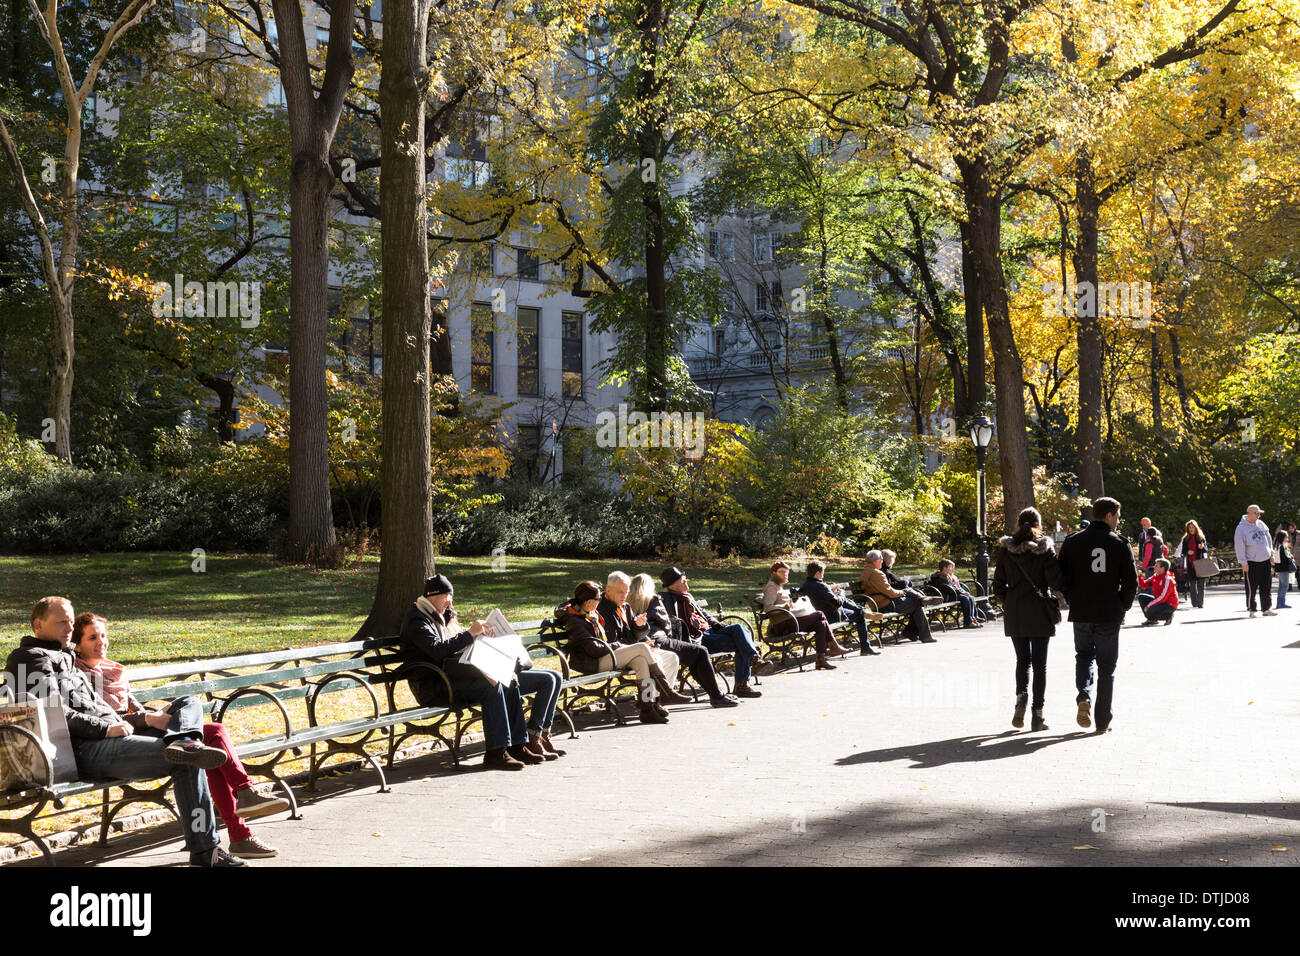 People Enjoying Autumn Trees and Foliage in Central Park, NYC Stock Photo